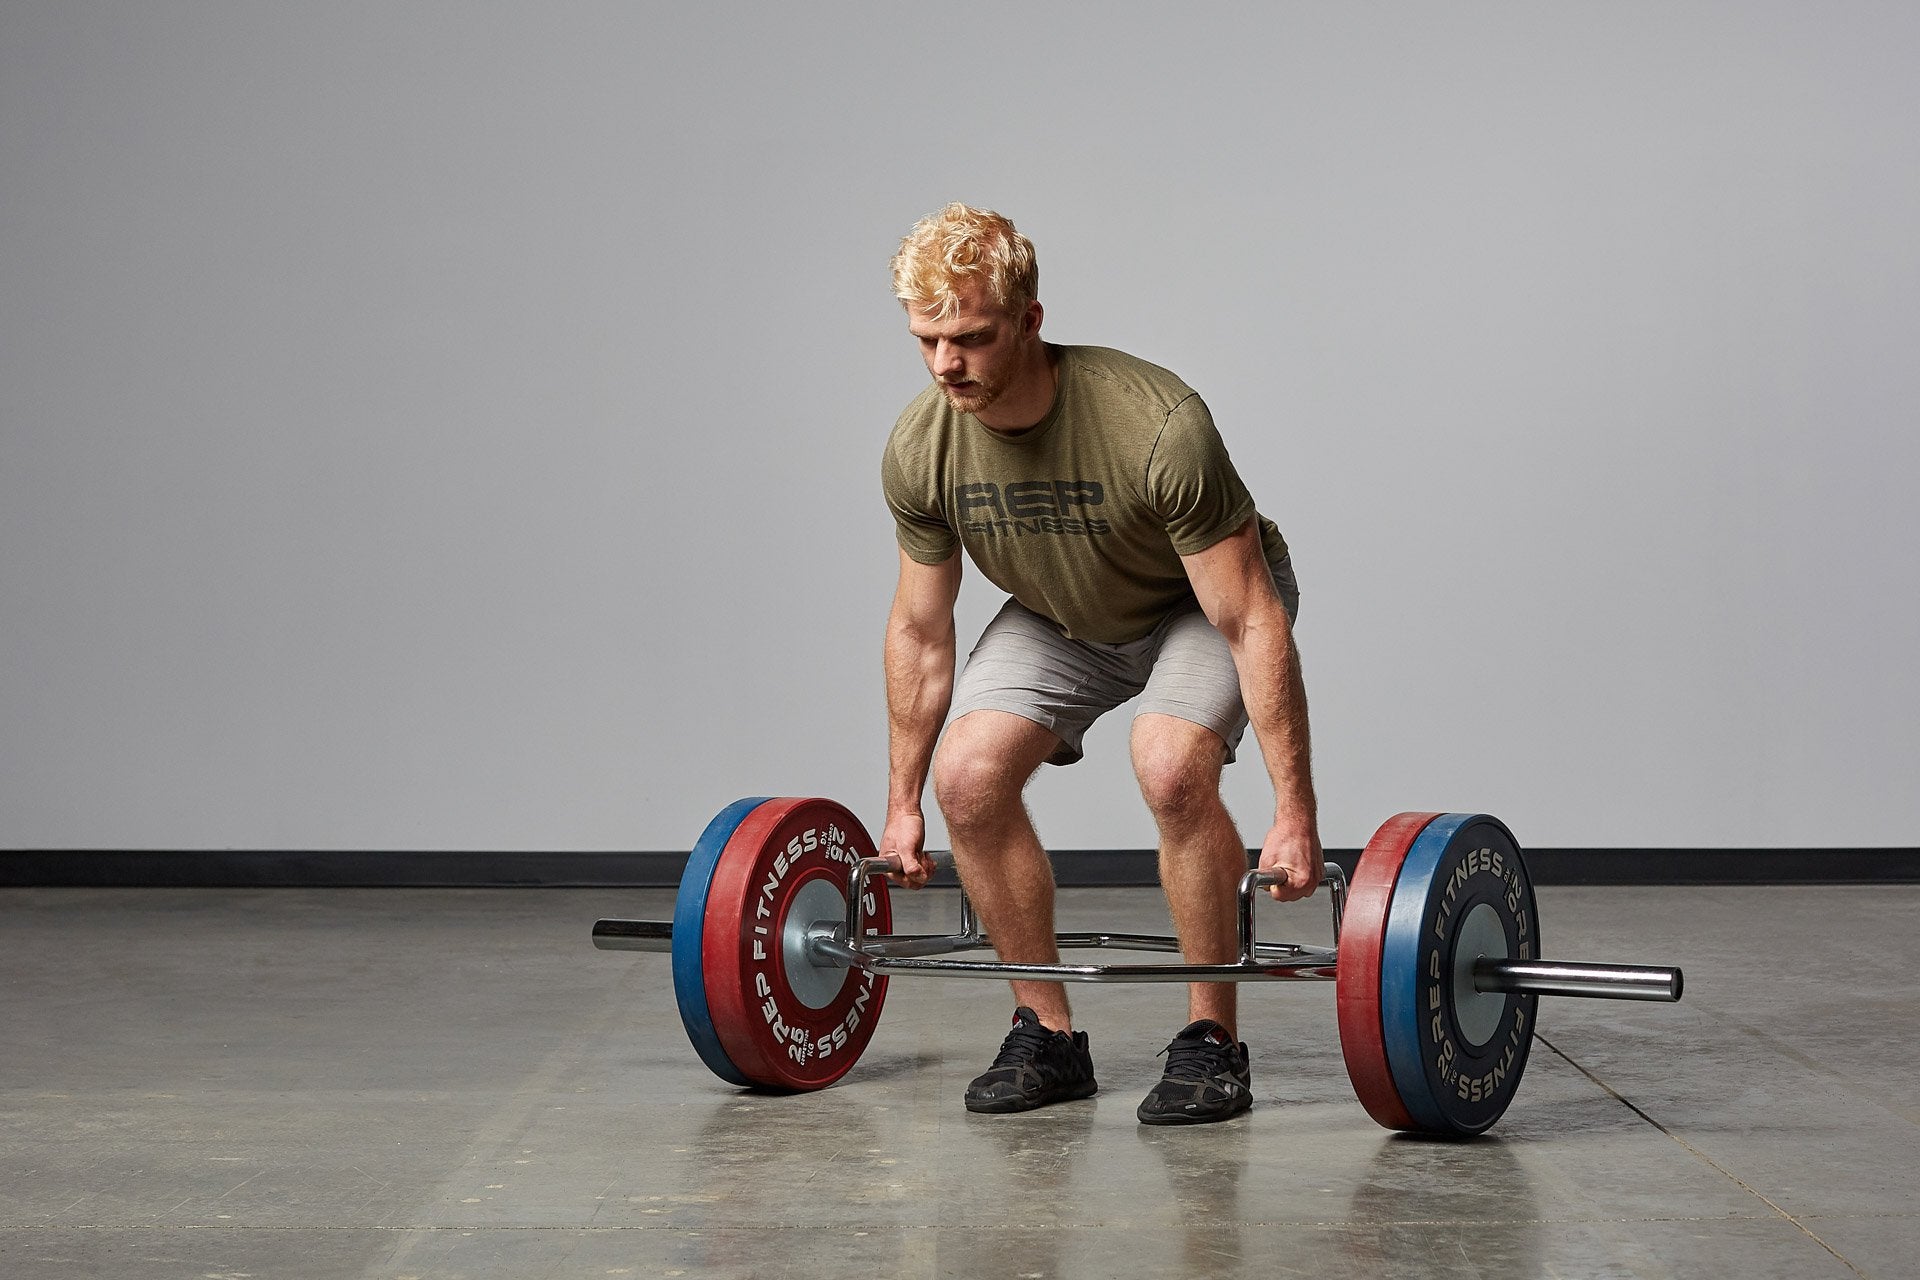 Trap Bar Training Exercises: Design, Benefits, How To's - Muscle